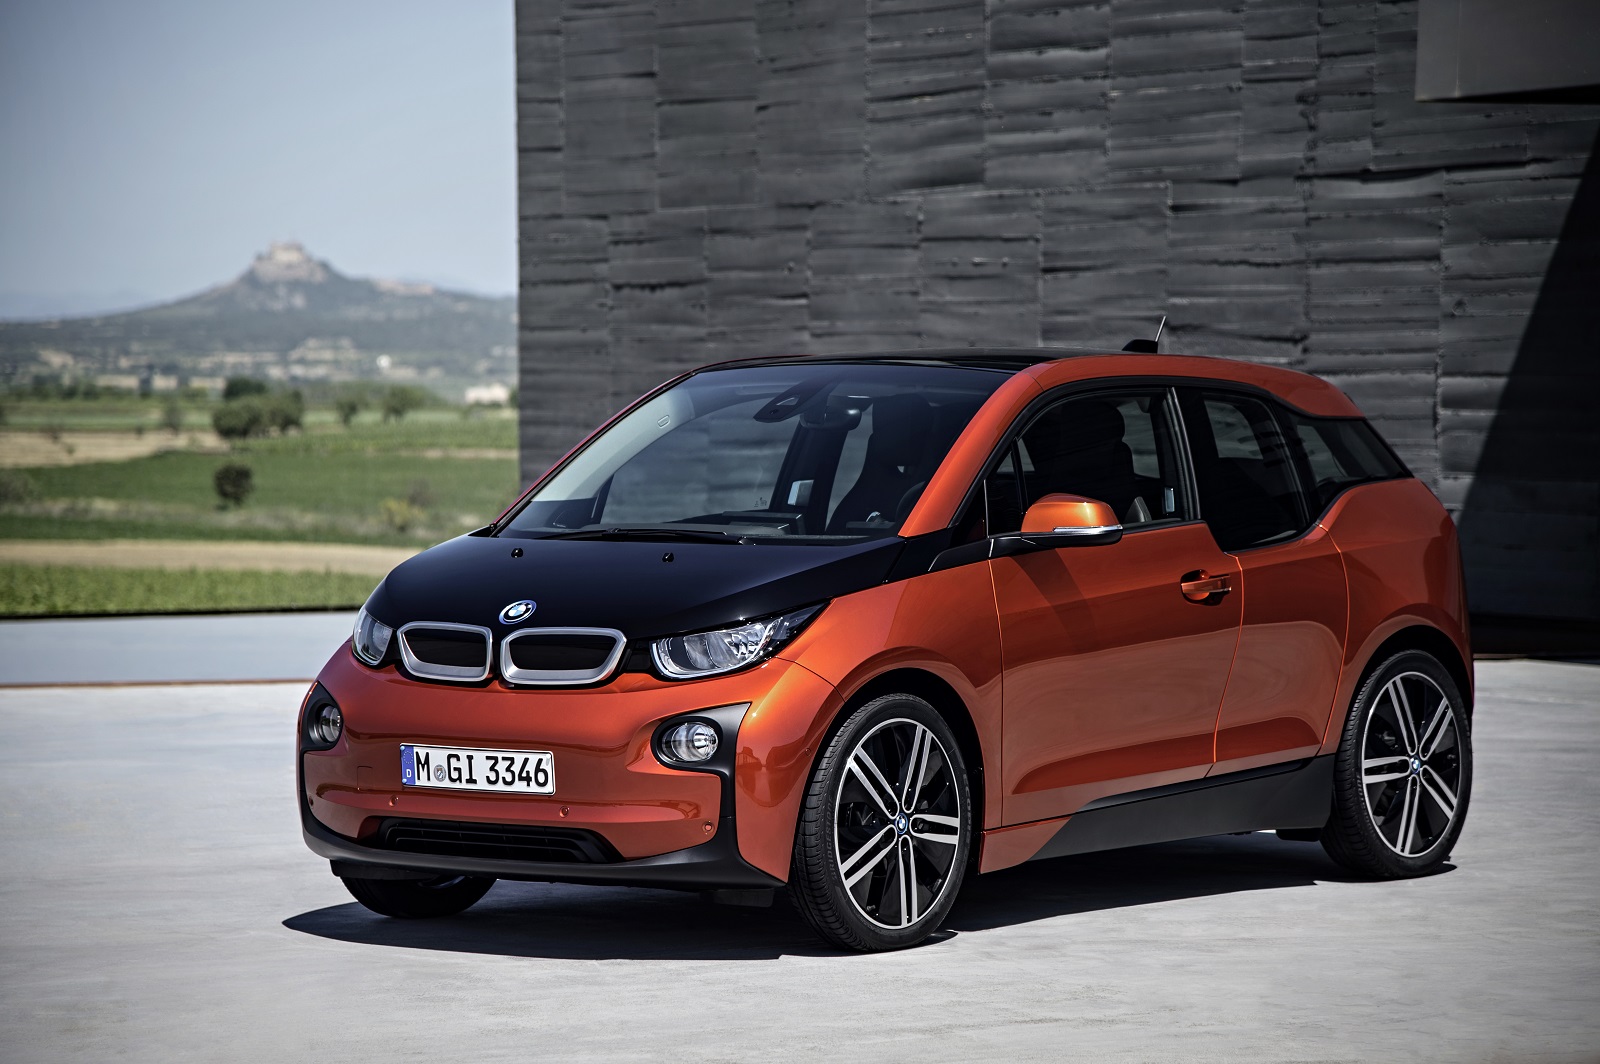 Are The BMW i3 And i8 Electric Cars Too Much Of A Stretch?